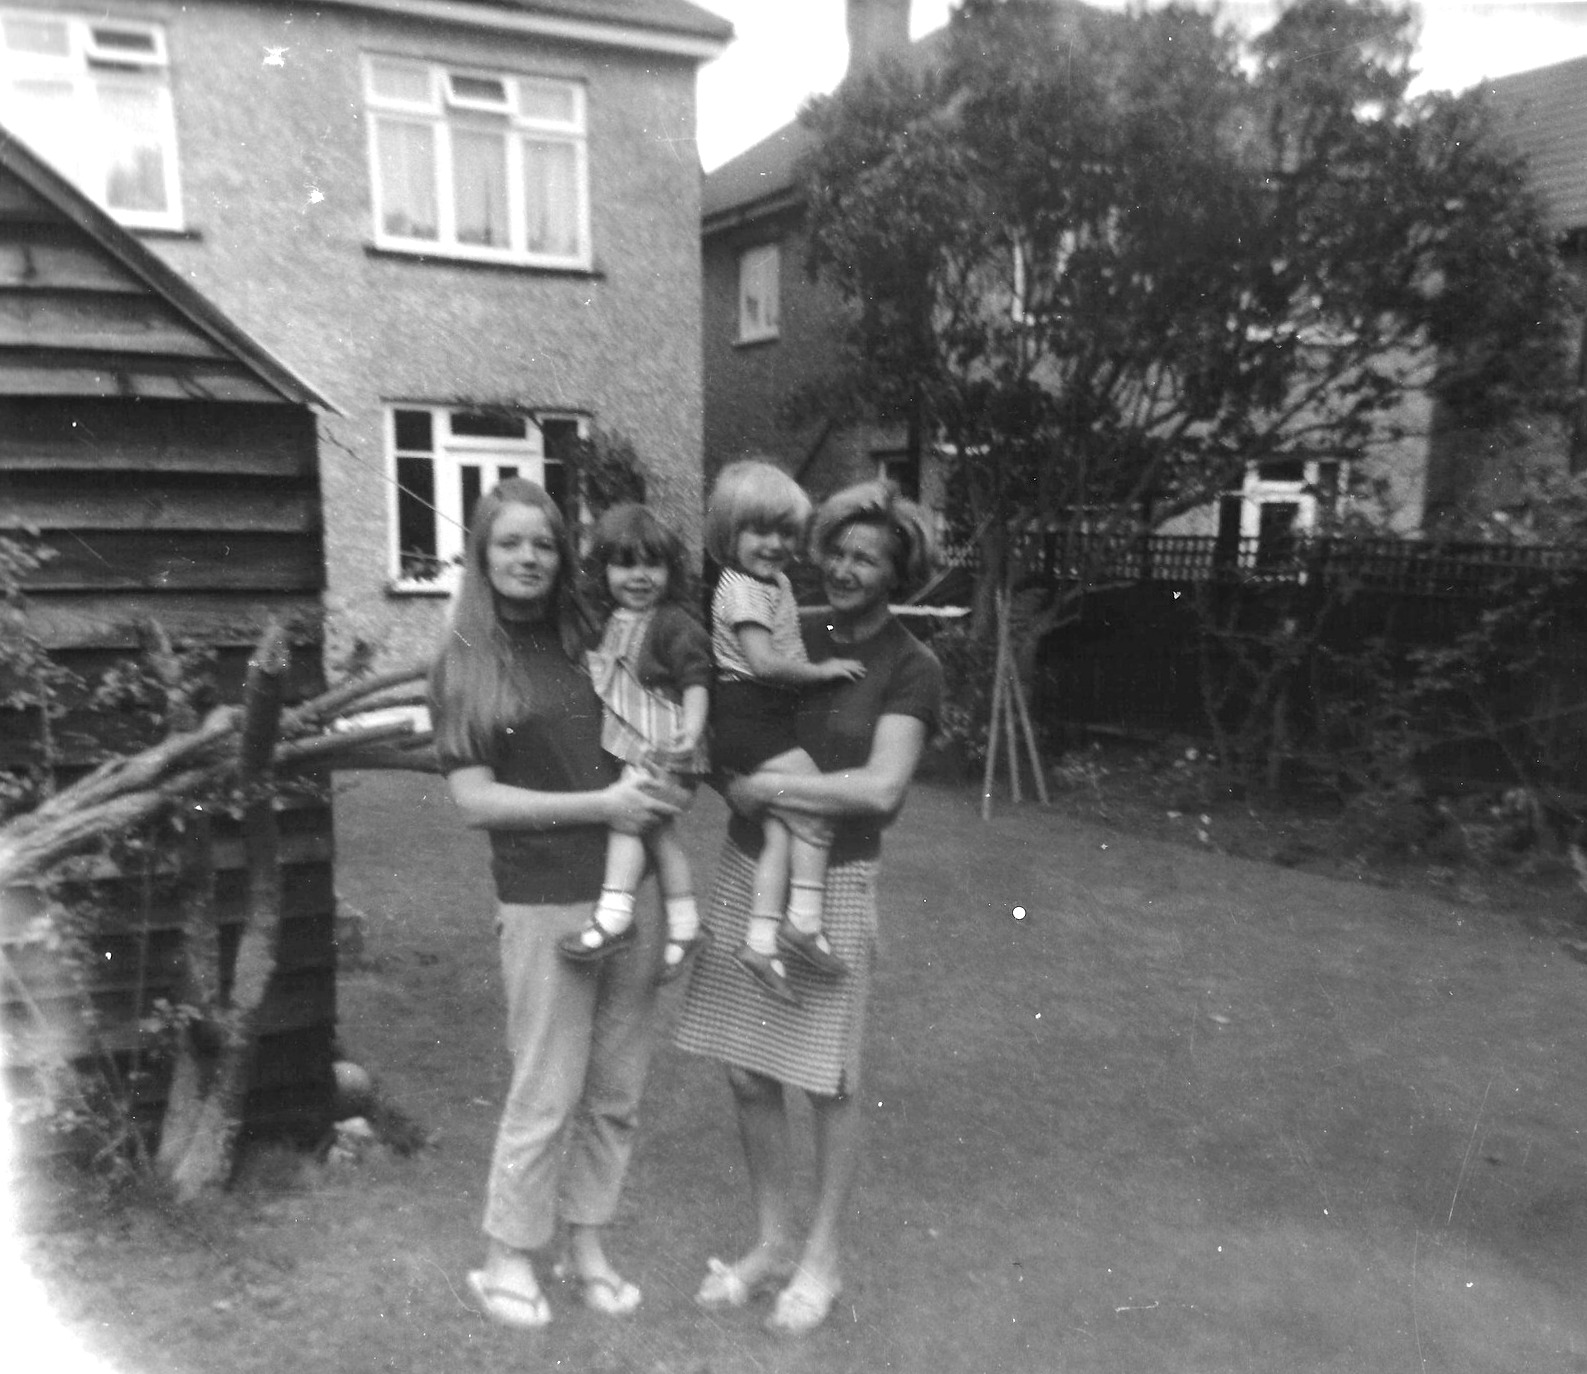 Family History: Danesbury Avenue, Tuckton, Christchurch, Dorset - 24th January 2020: The back garden of Danesbury, with Mother and Grandmother, 1970